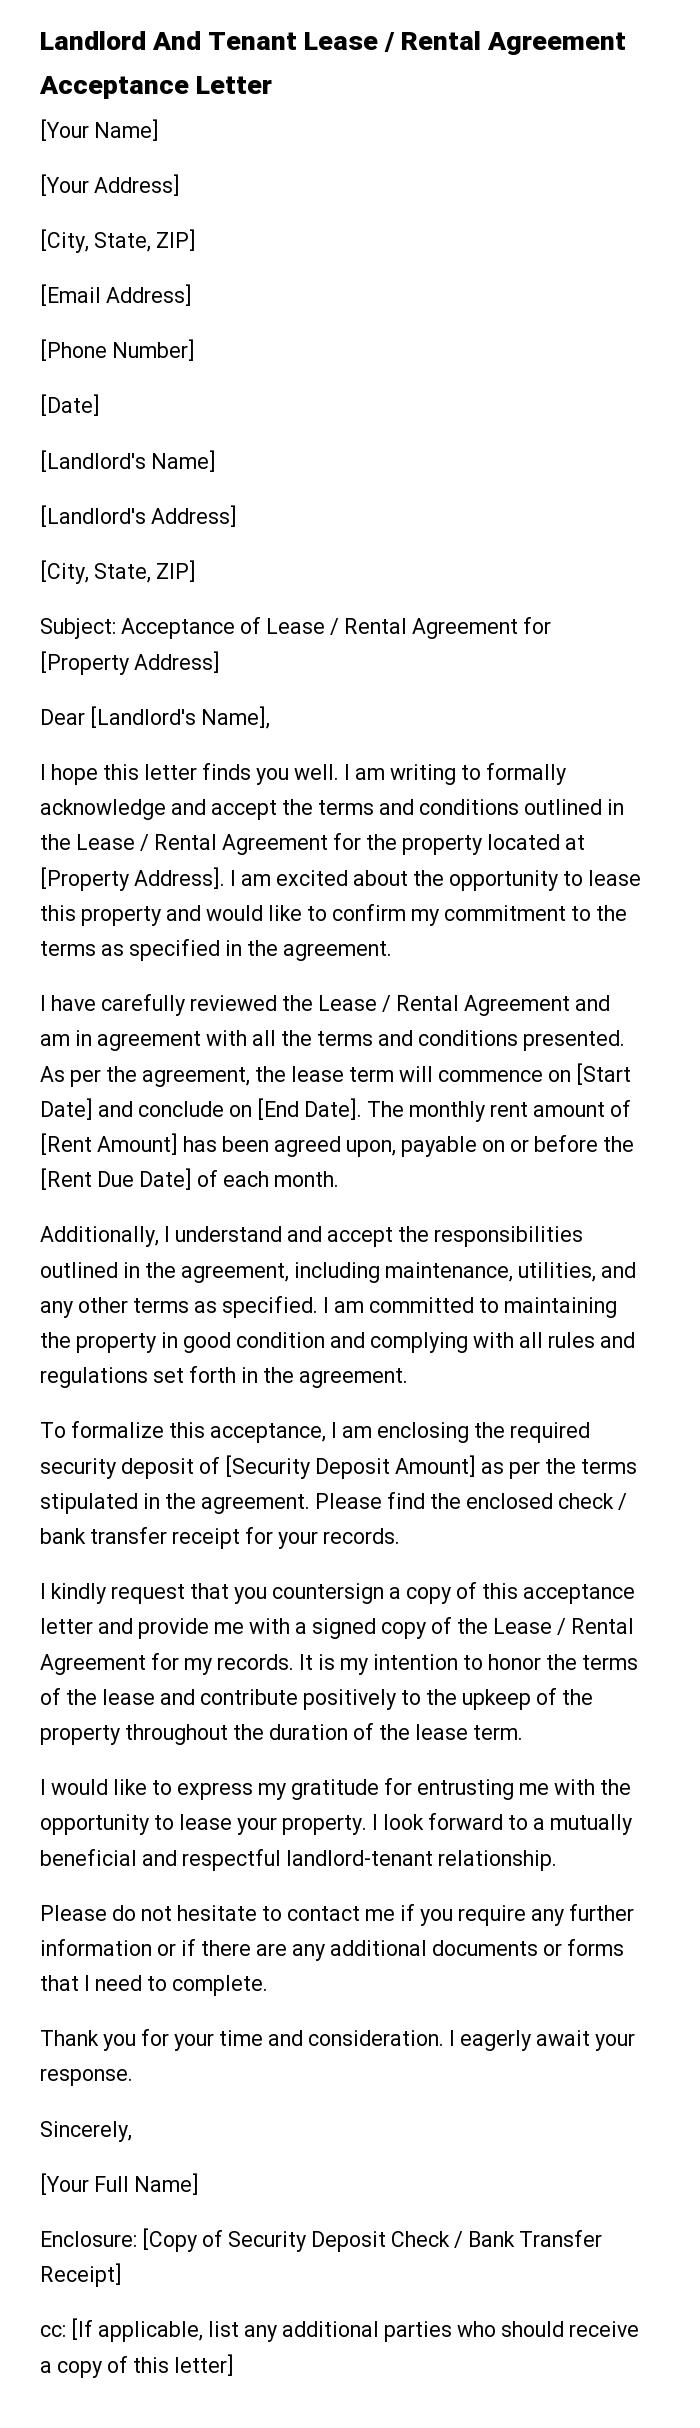 Landlord And Tenant Lease / Rental Agreement Acceptance Letter